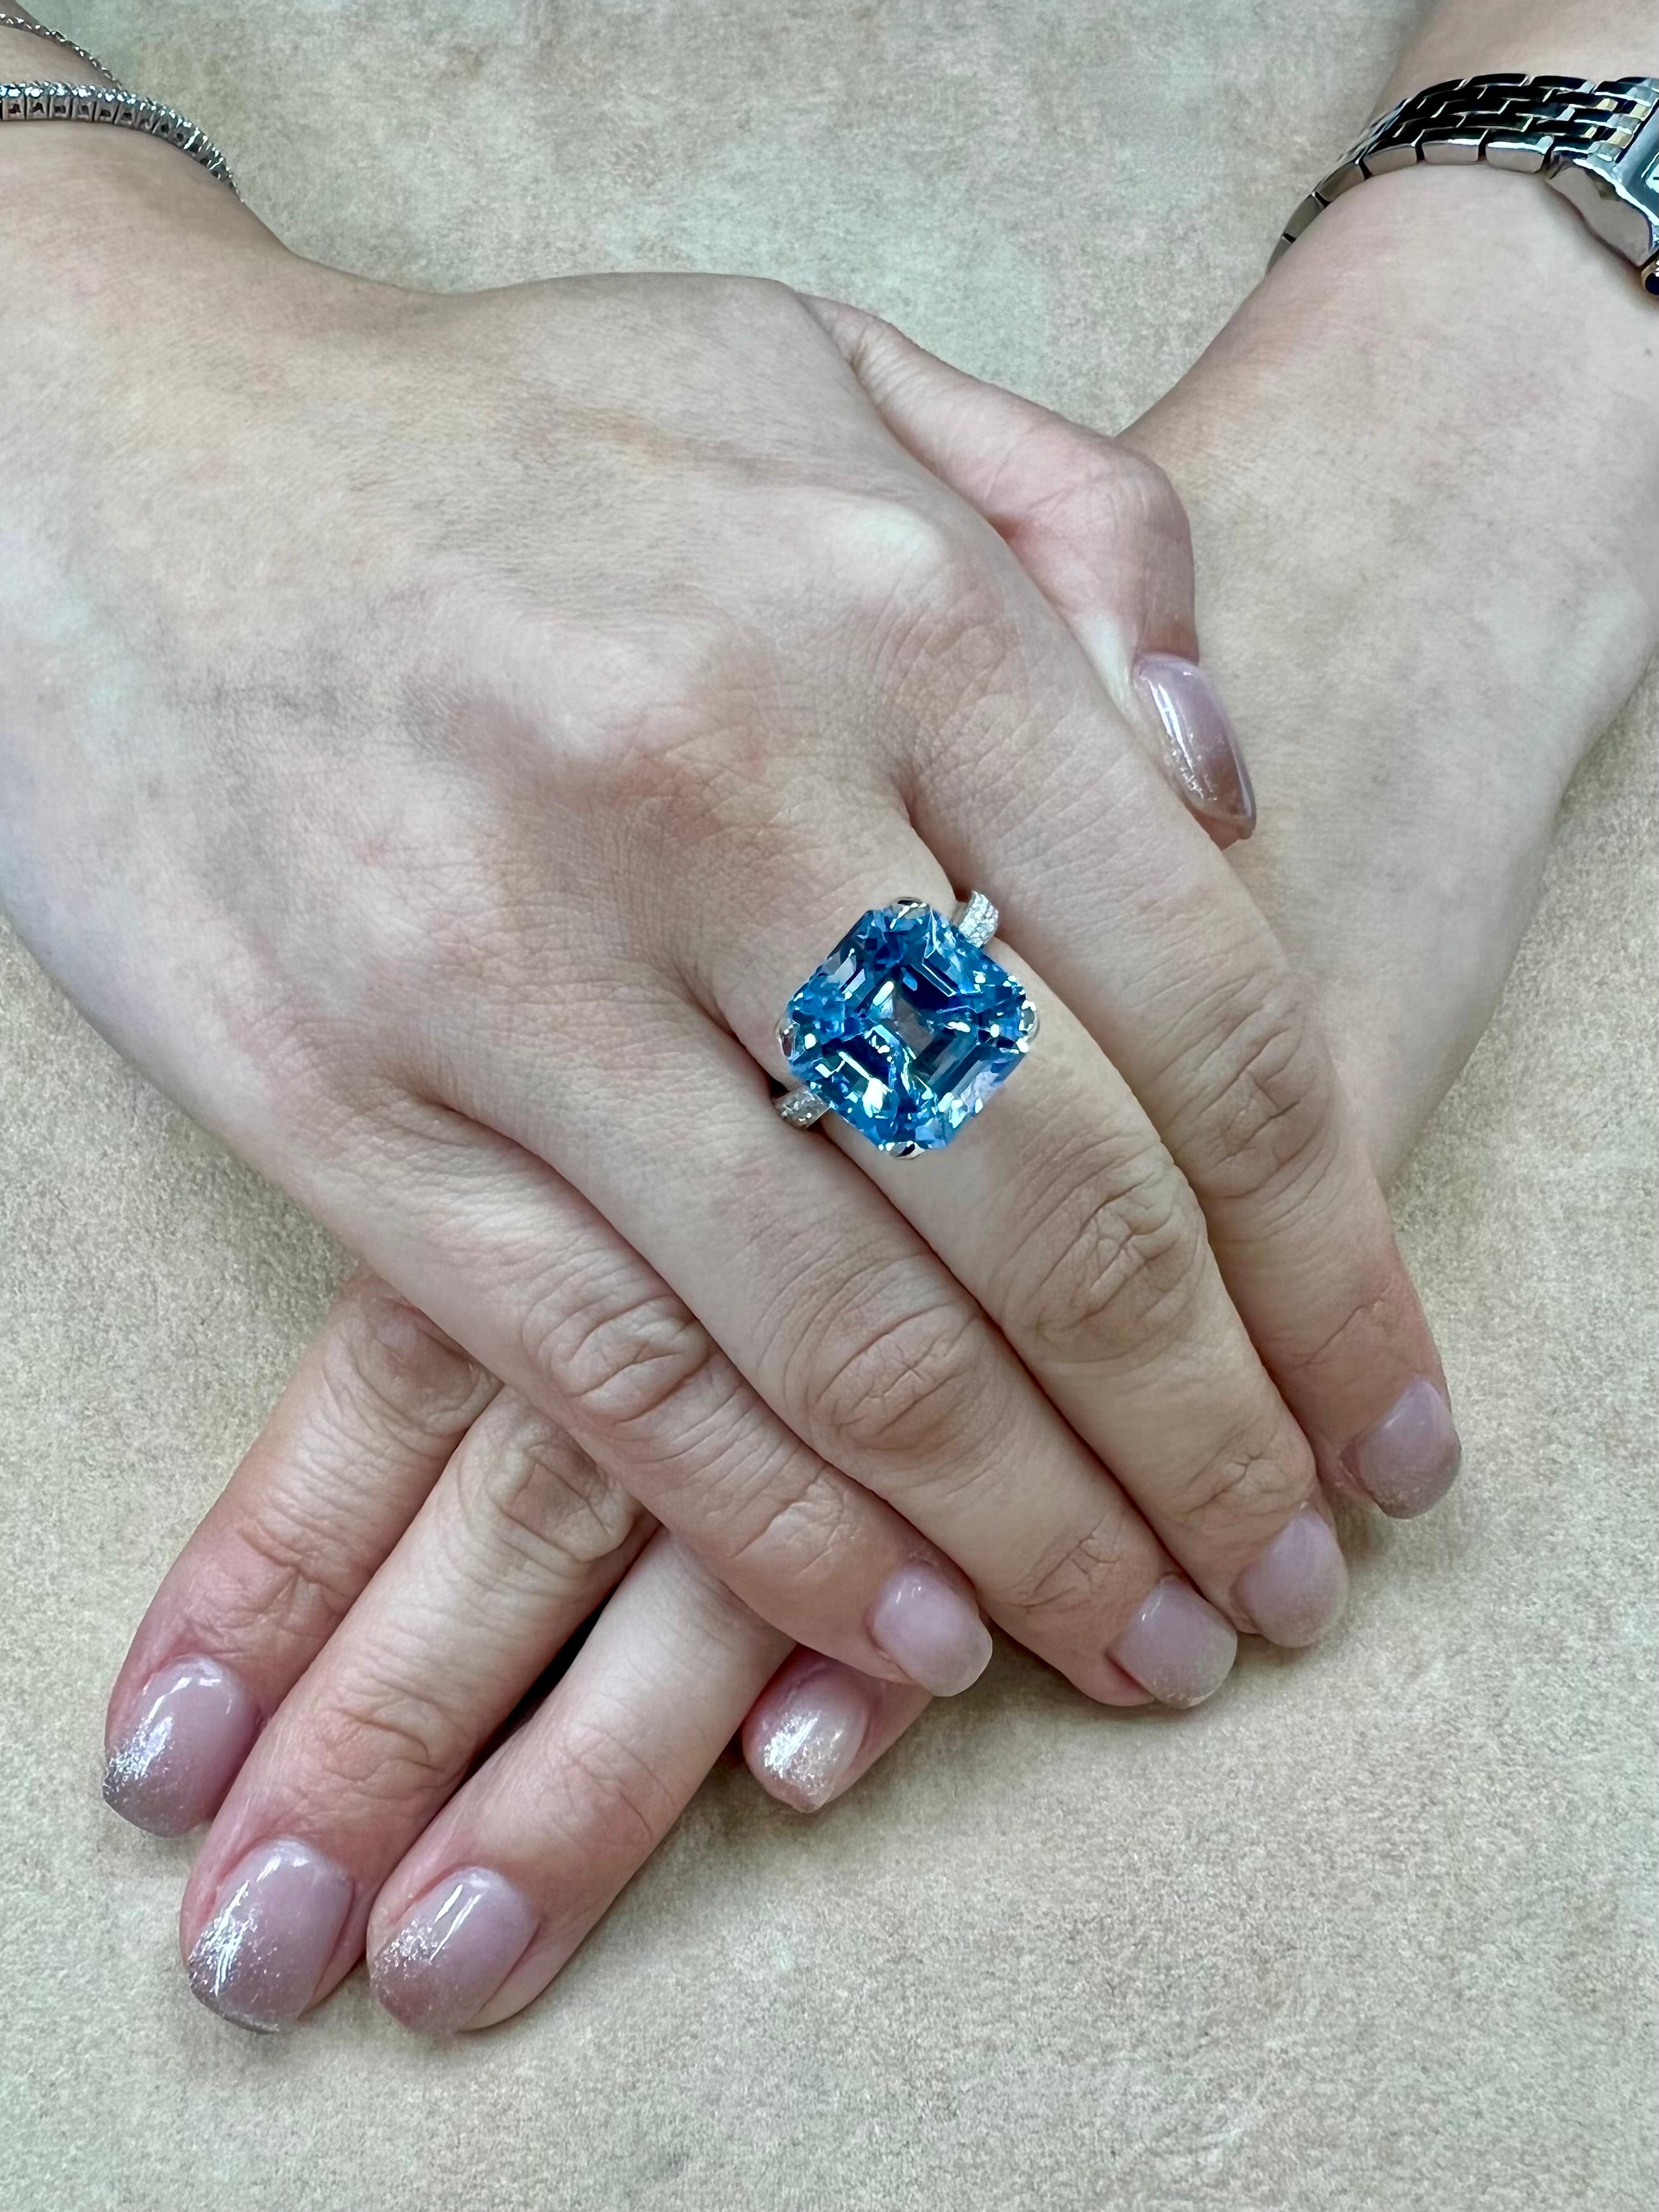 Check out the HD video! Certified natural aquamarine (Beryl) This is a super special piece in material and design. There are many excellent qualities to this piece of fine jewelry! First the Asscher cut Aquamarine has the very desirable Santa Maria